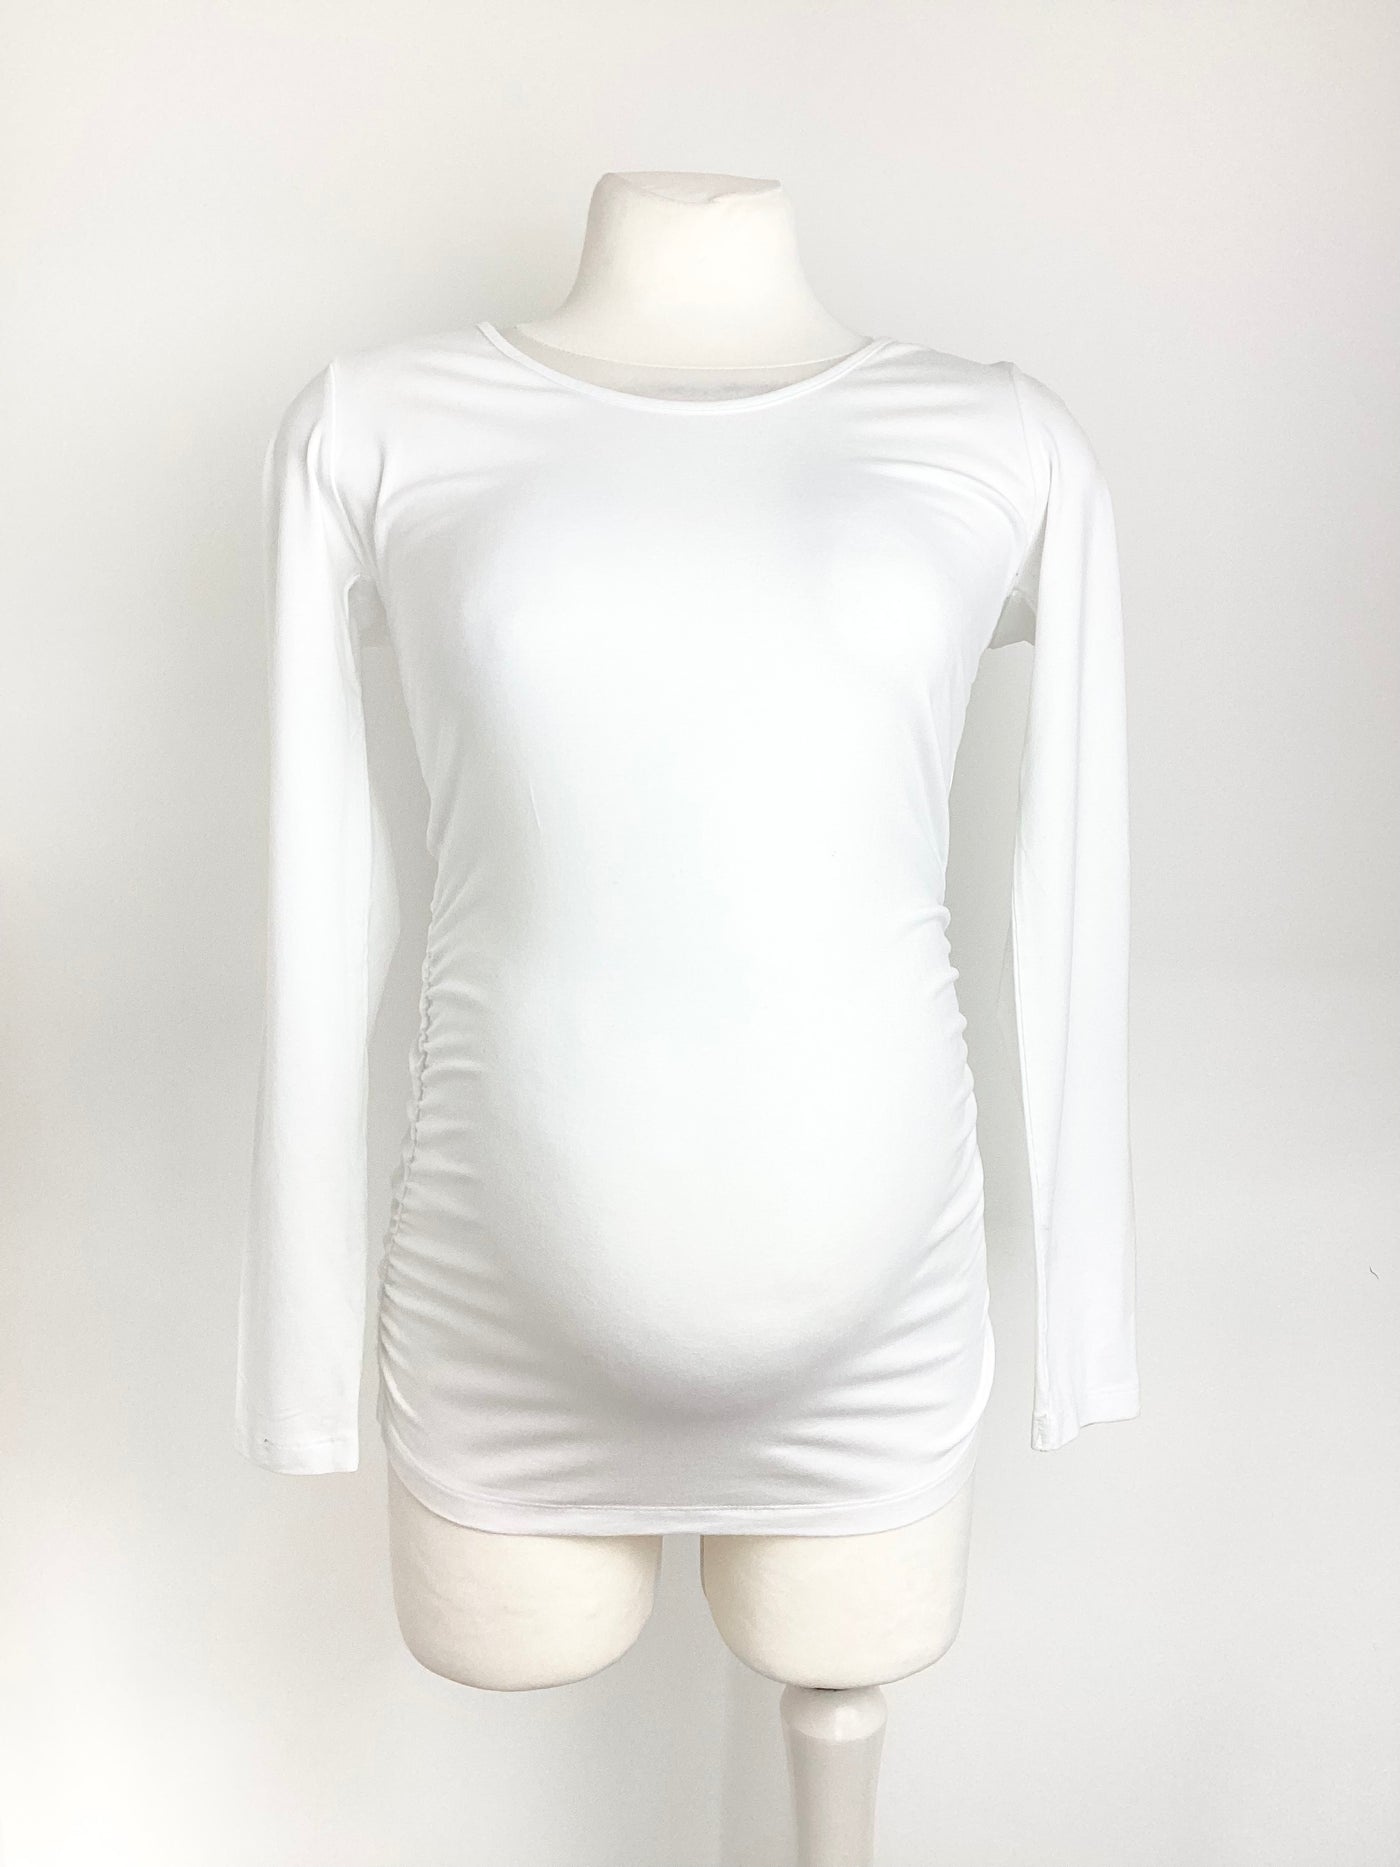 Seraphine white long sleeved top - Size 10